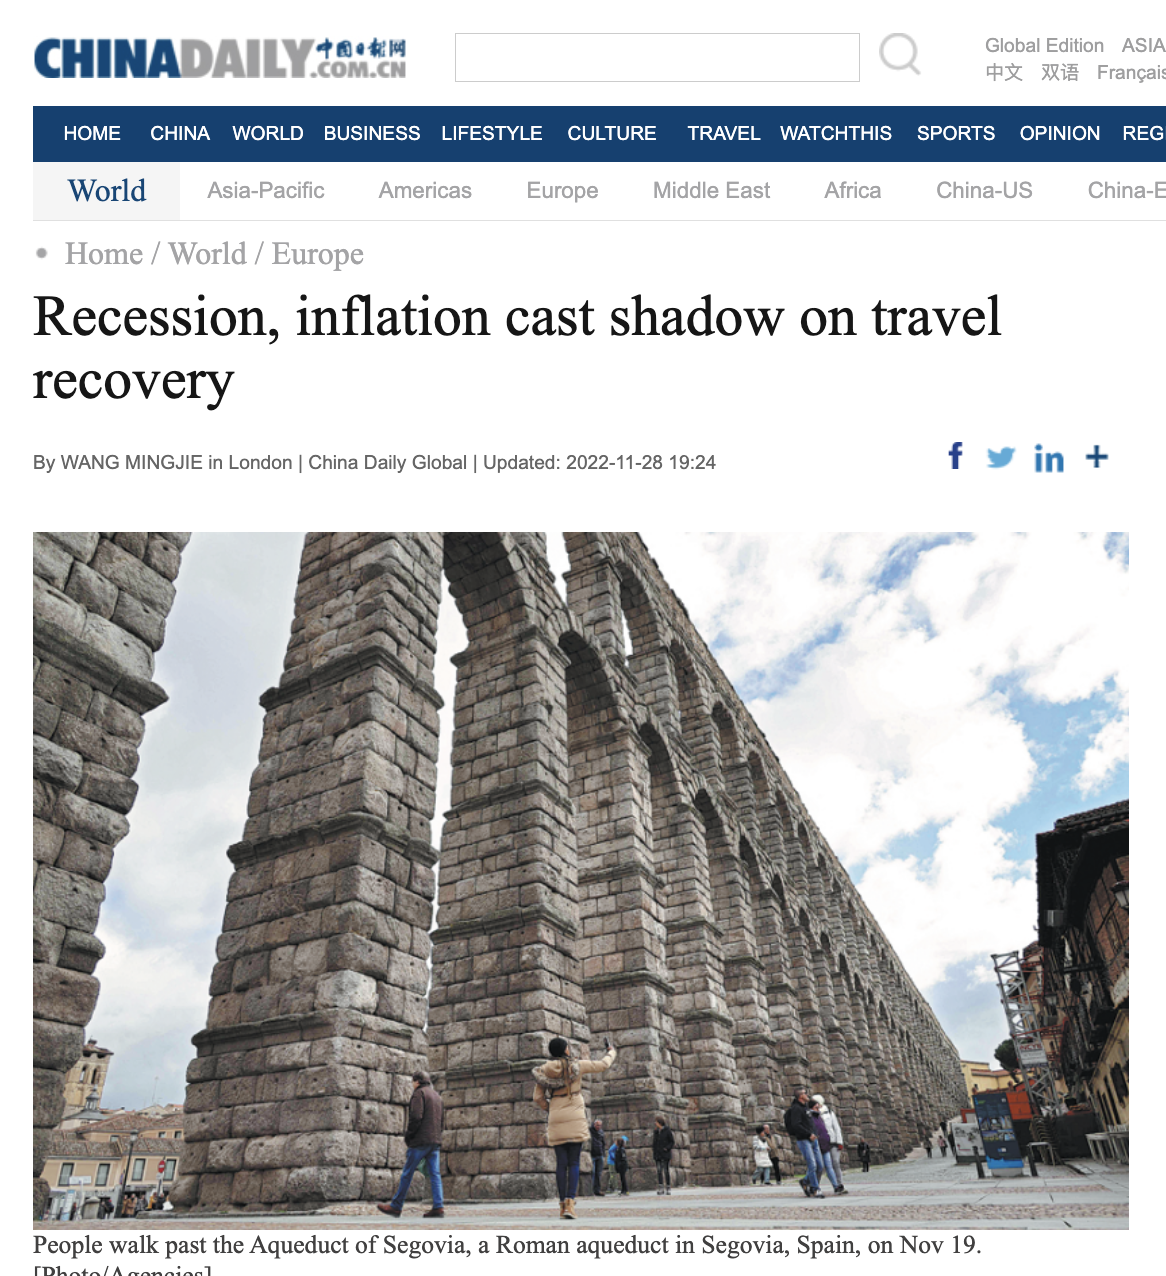 Professor Dimitrios Buhalis interview on China Daily on global economic crisis and Tourism,